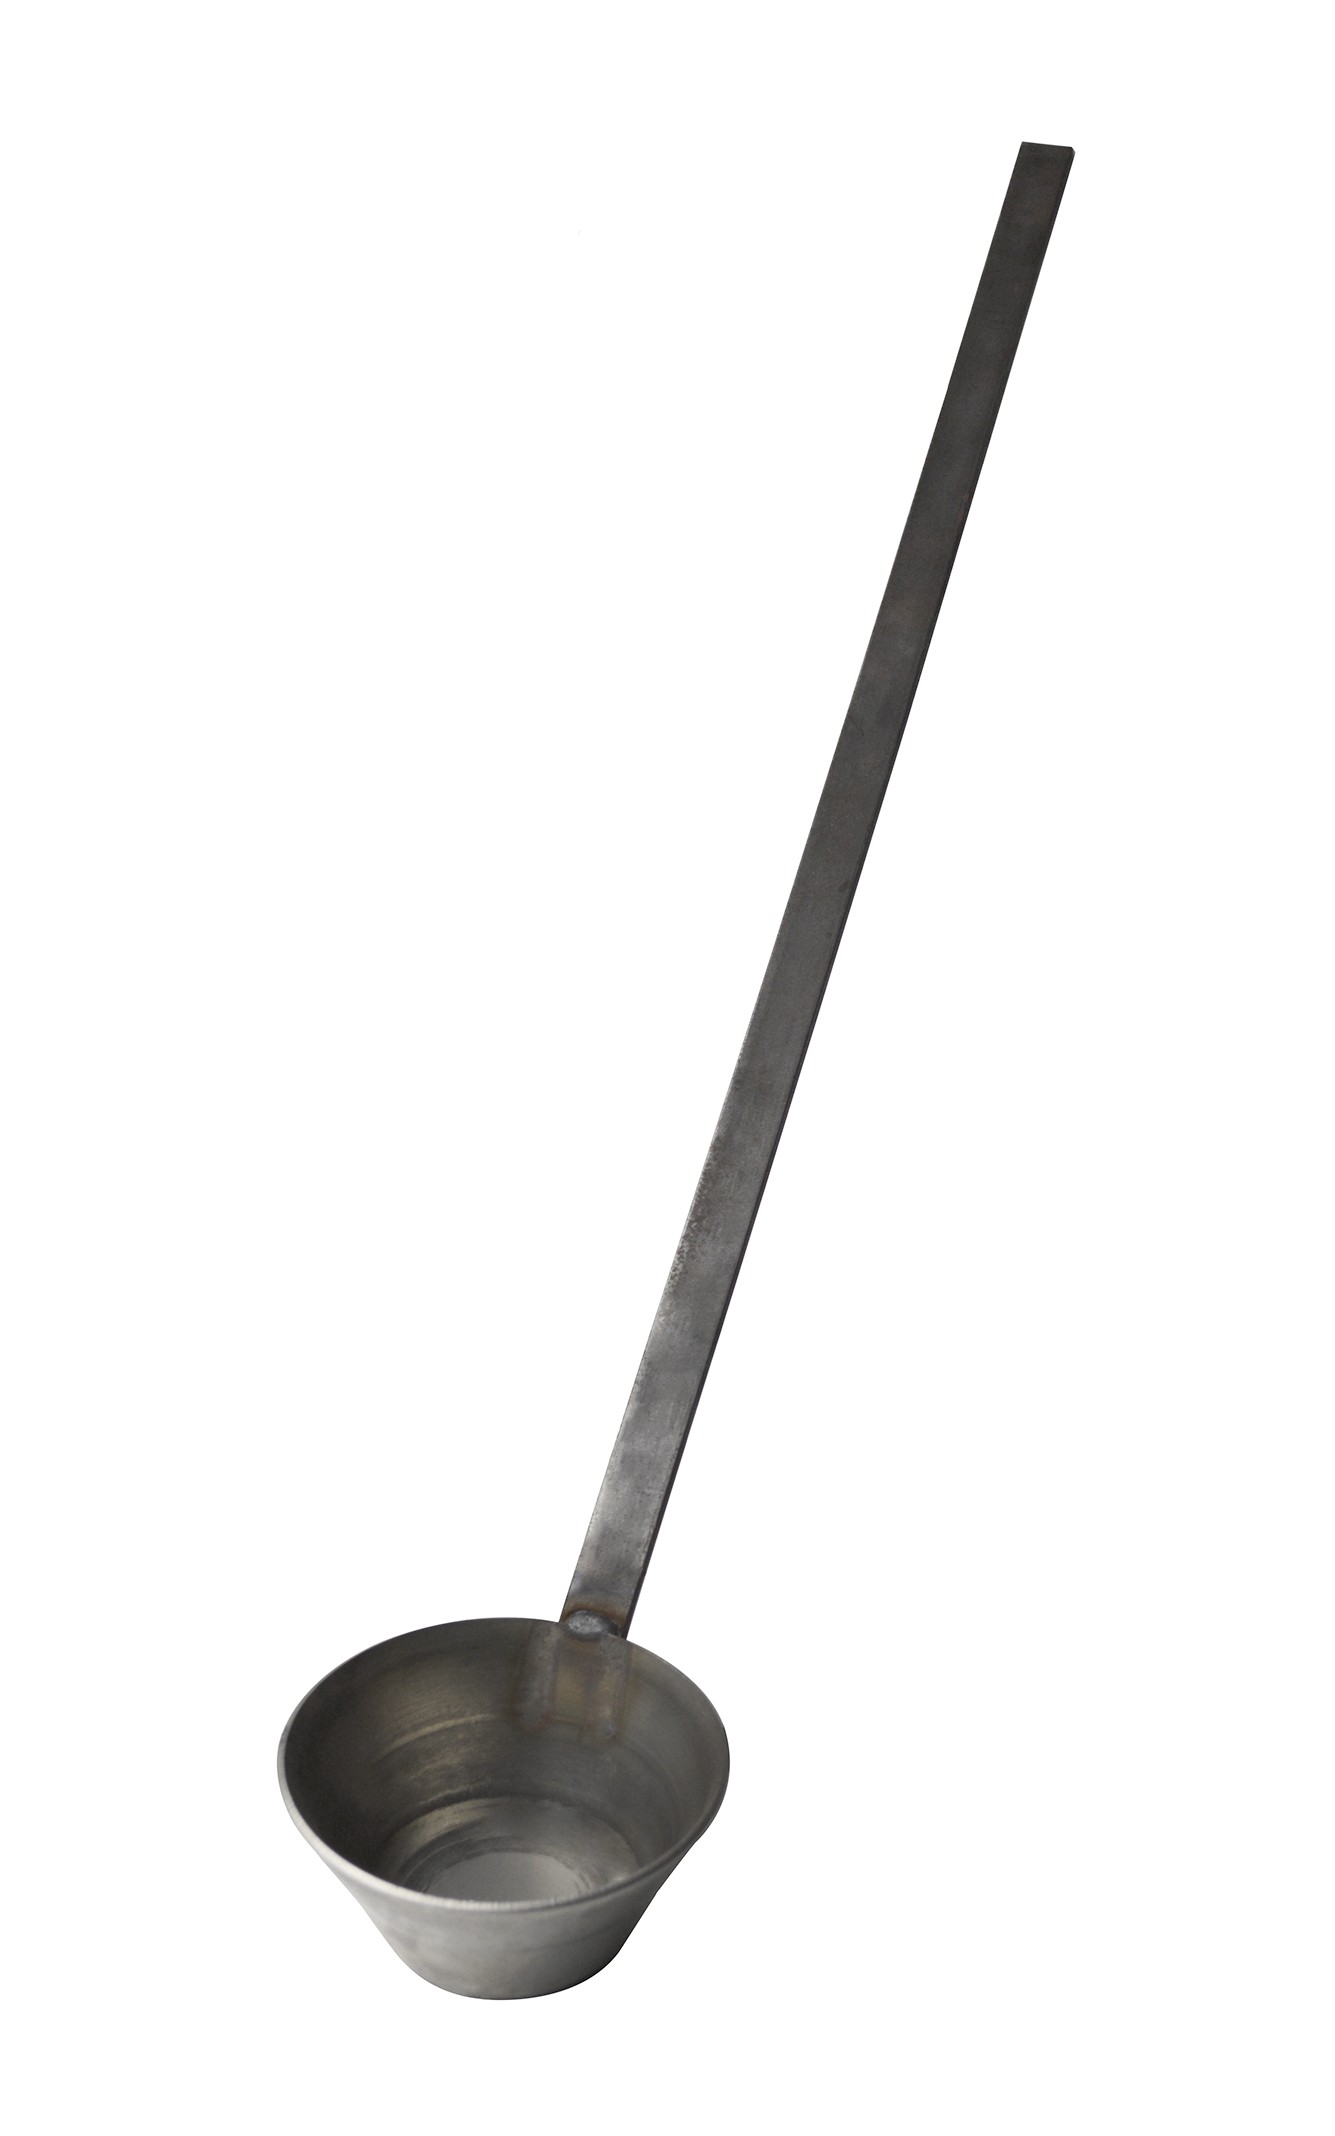 10 fl oz Stainless Steel Pouring Ladle w/ Flat Steel Handle